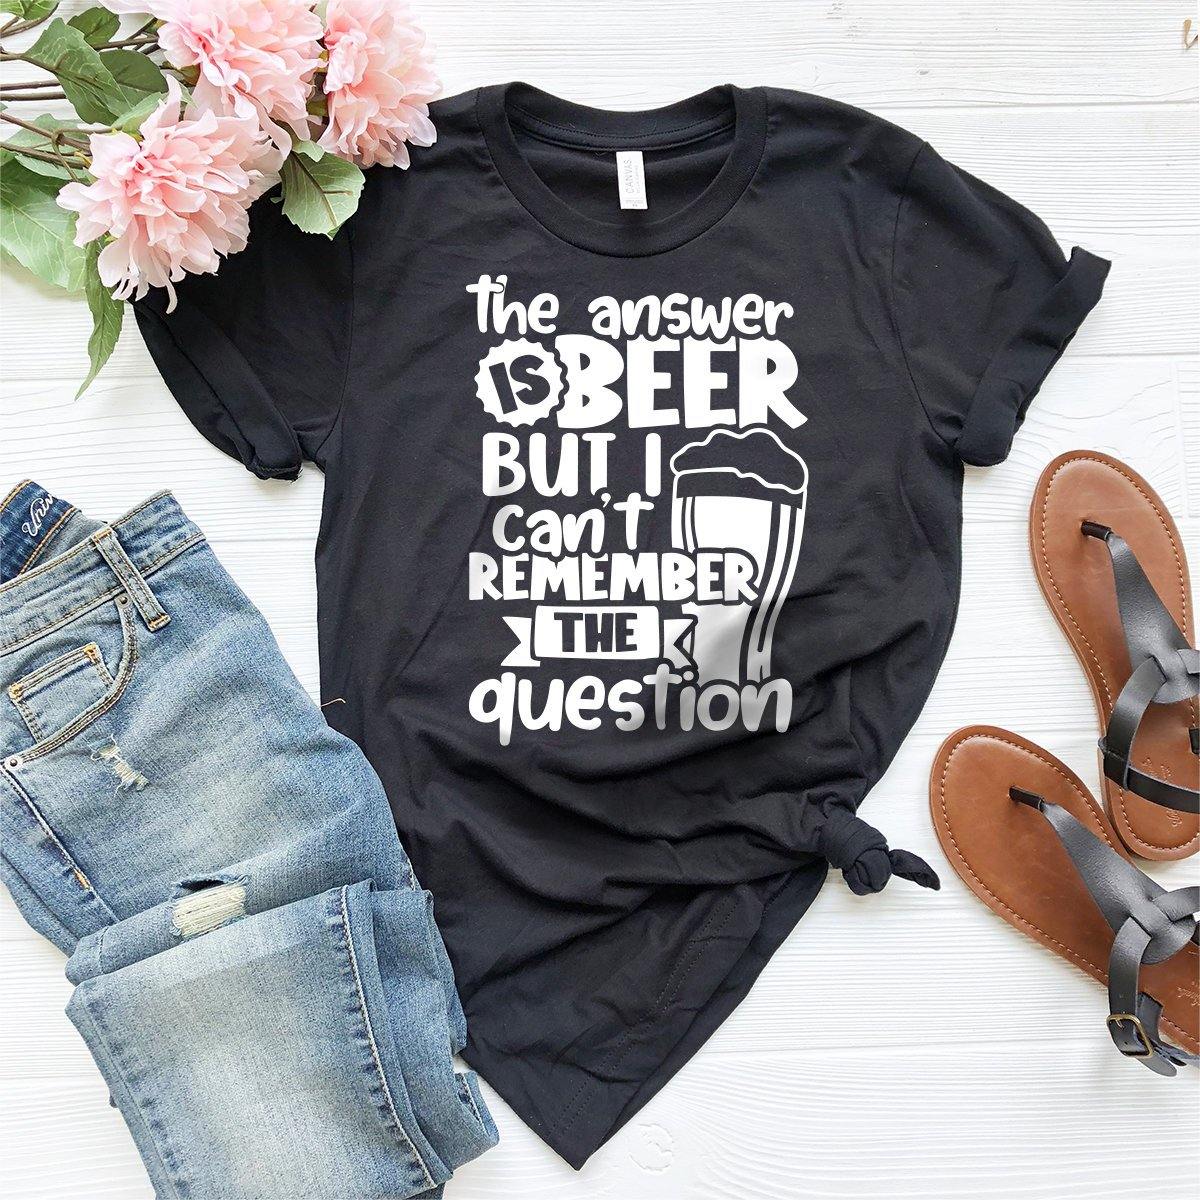 Funny Beer T-Shirt, Beer Lover Tee, Beer Fanatic Shirt, Beer Drinker Gift, The Answer Is Beer But I Can't Remember The Question Tee - Fastdeliverytees.com